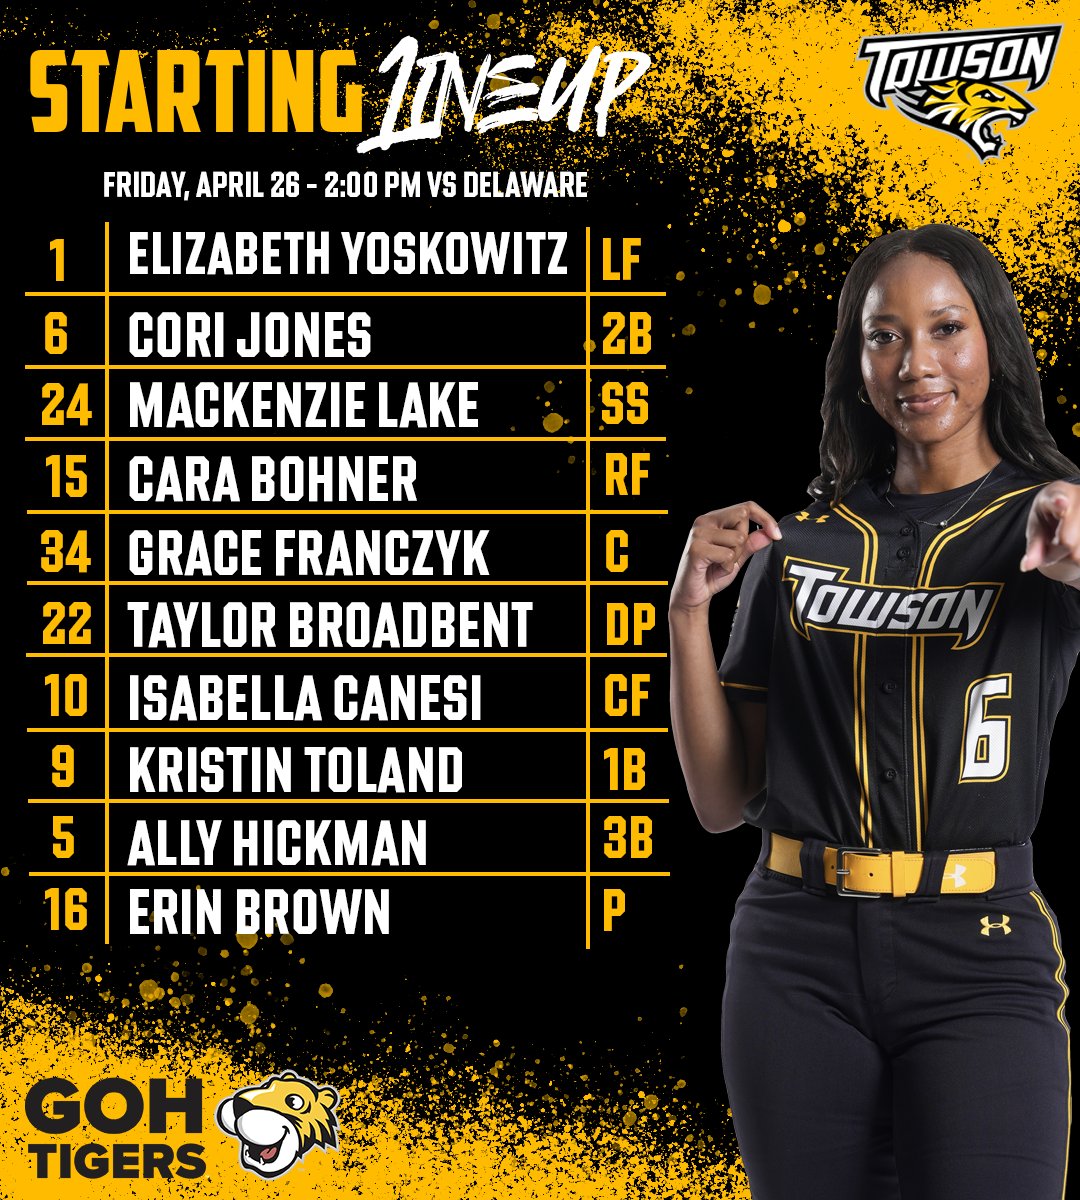 Our starting lineup against the Blue Hens! #GohTigers